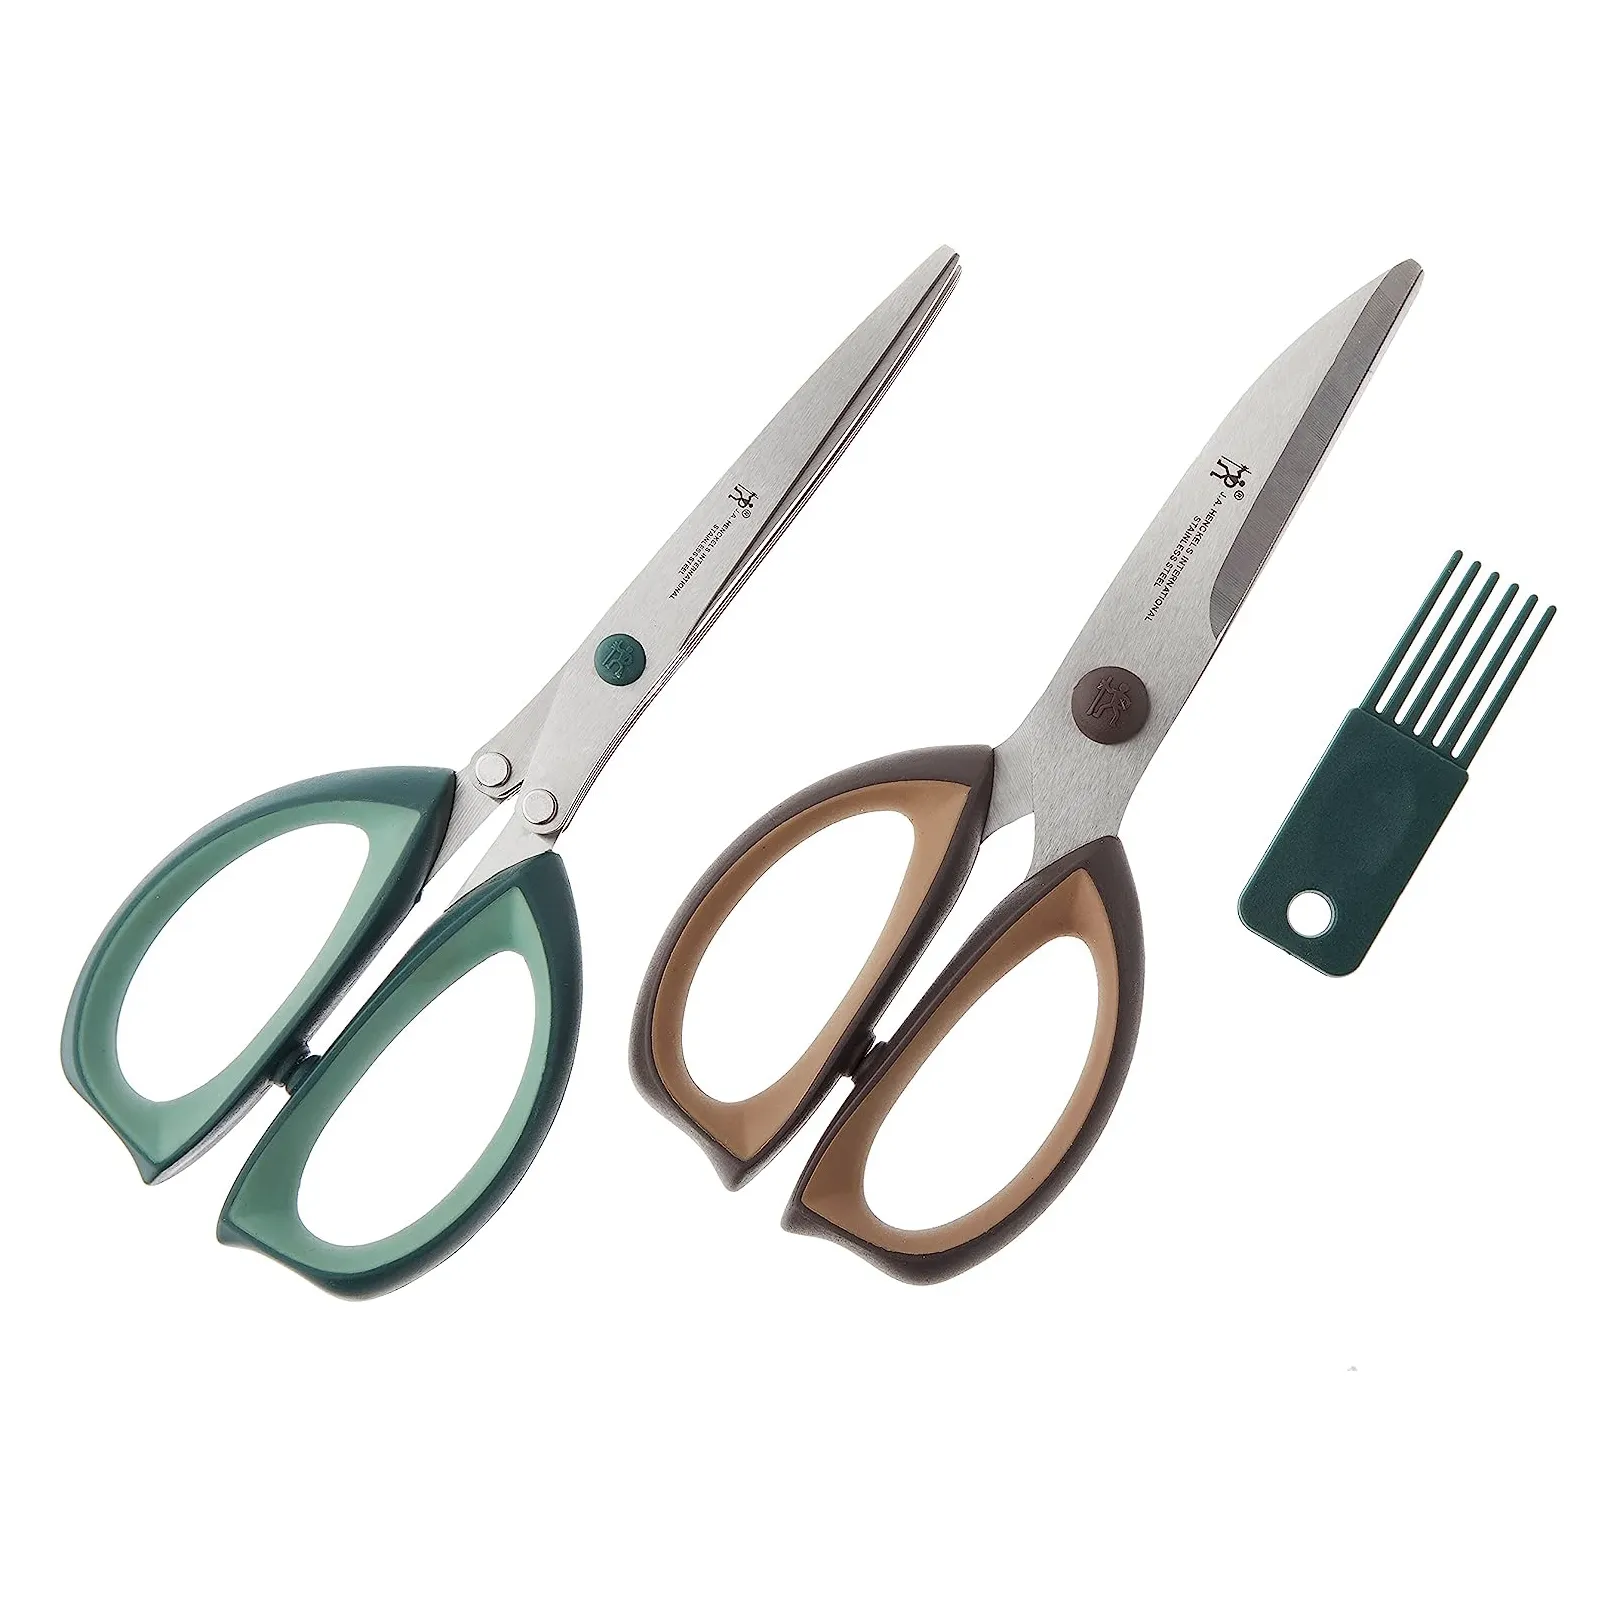 https://www.homethreads.com/files/zwilling/11510-100-henckels-2-pc-kitchen-and-herb-shears-set-2.webp